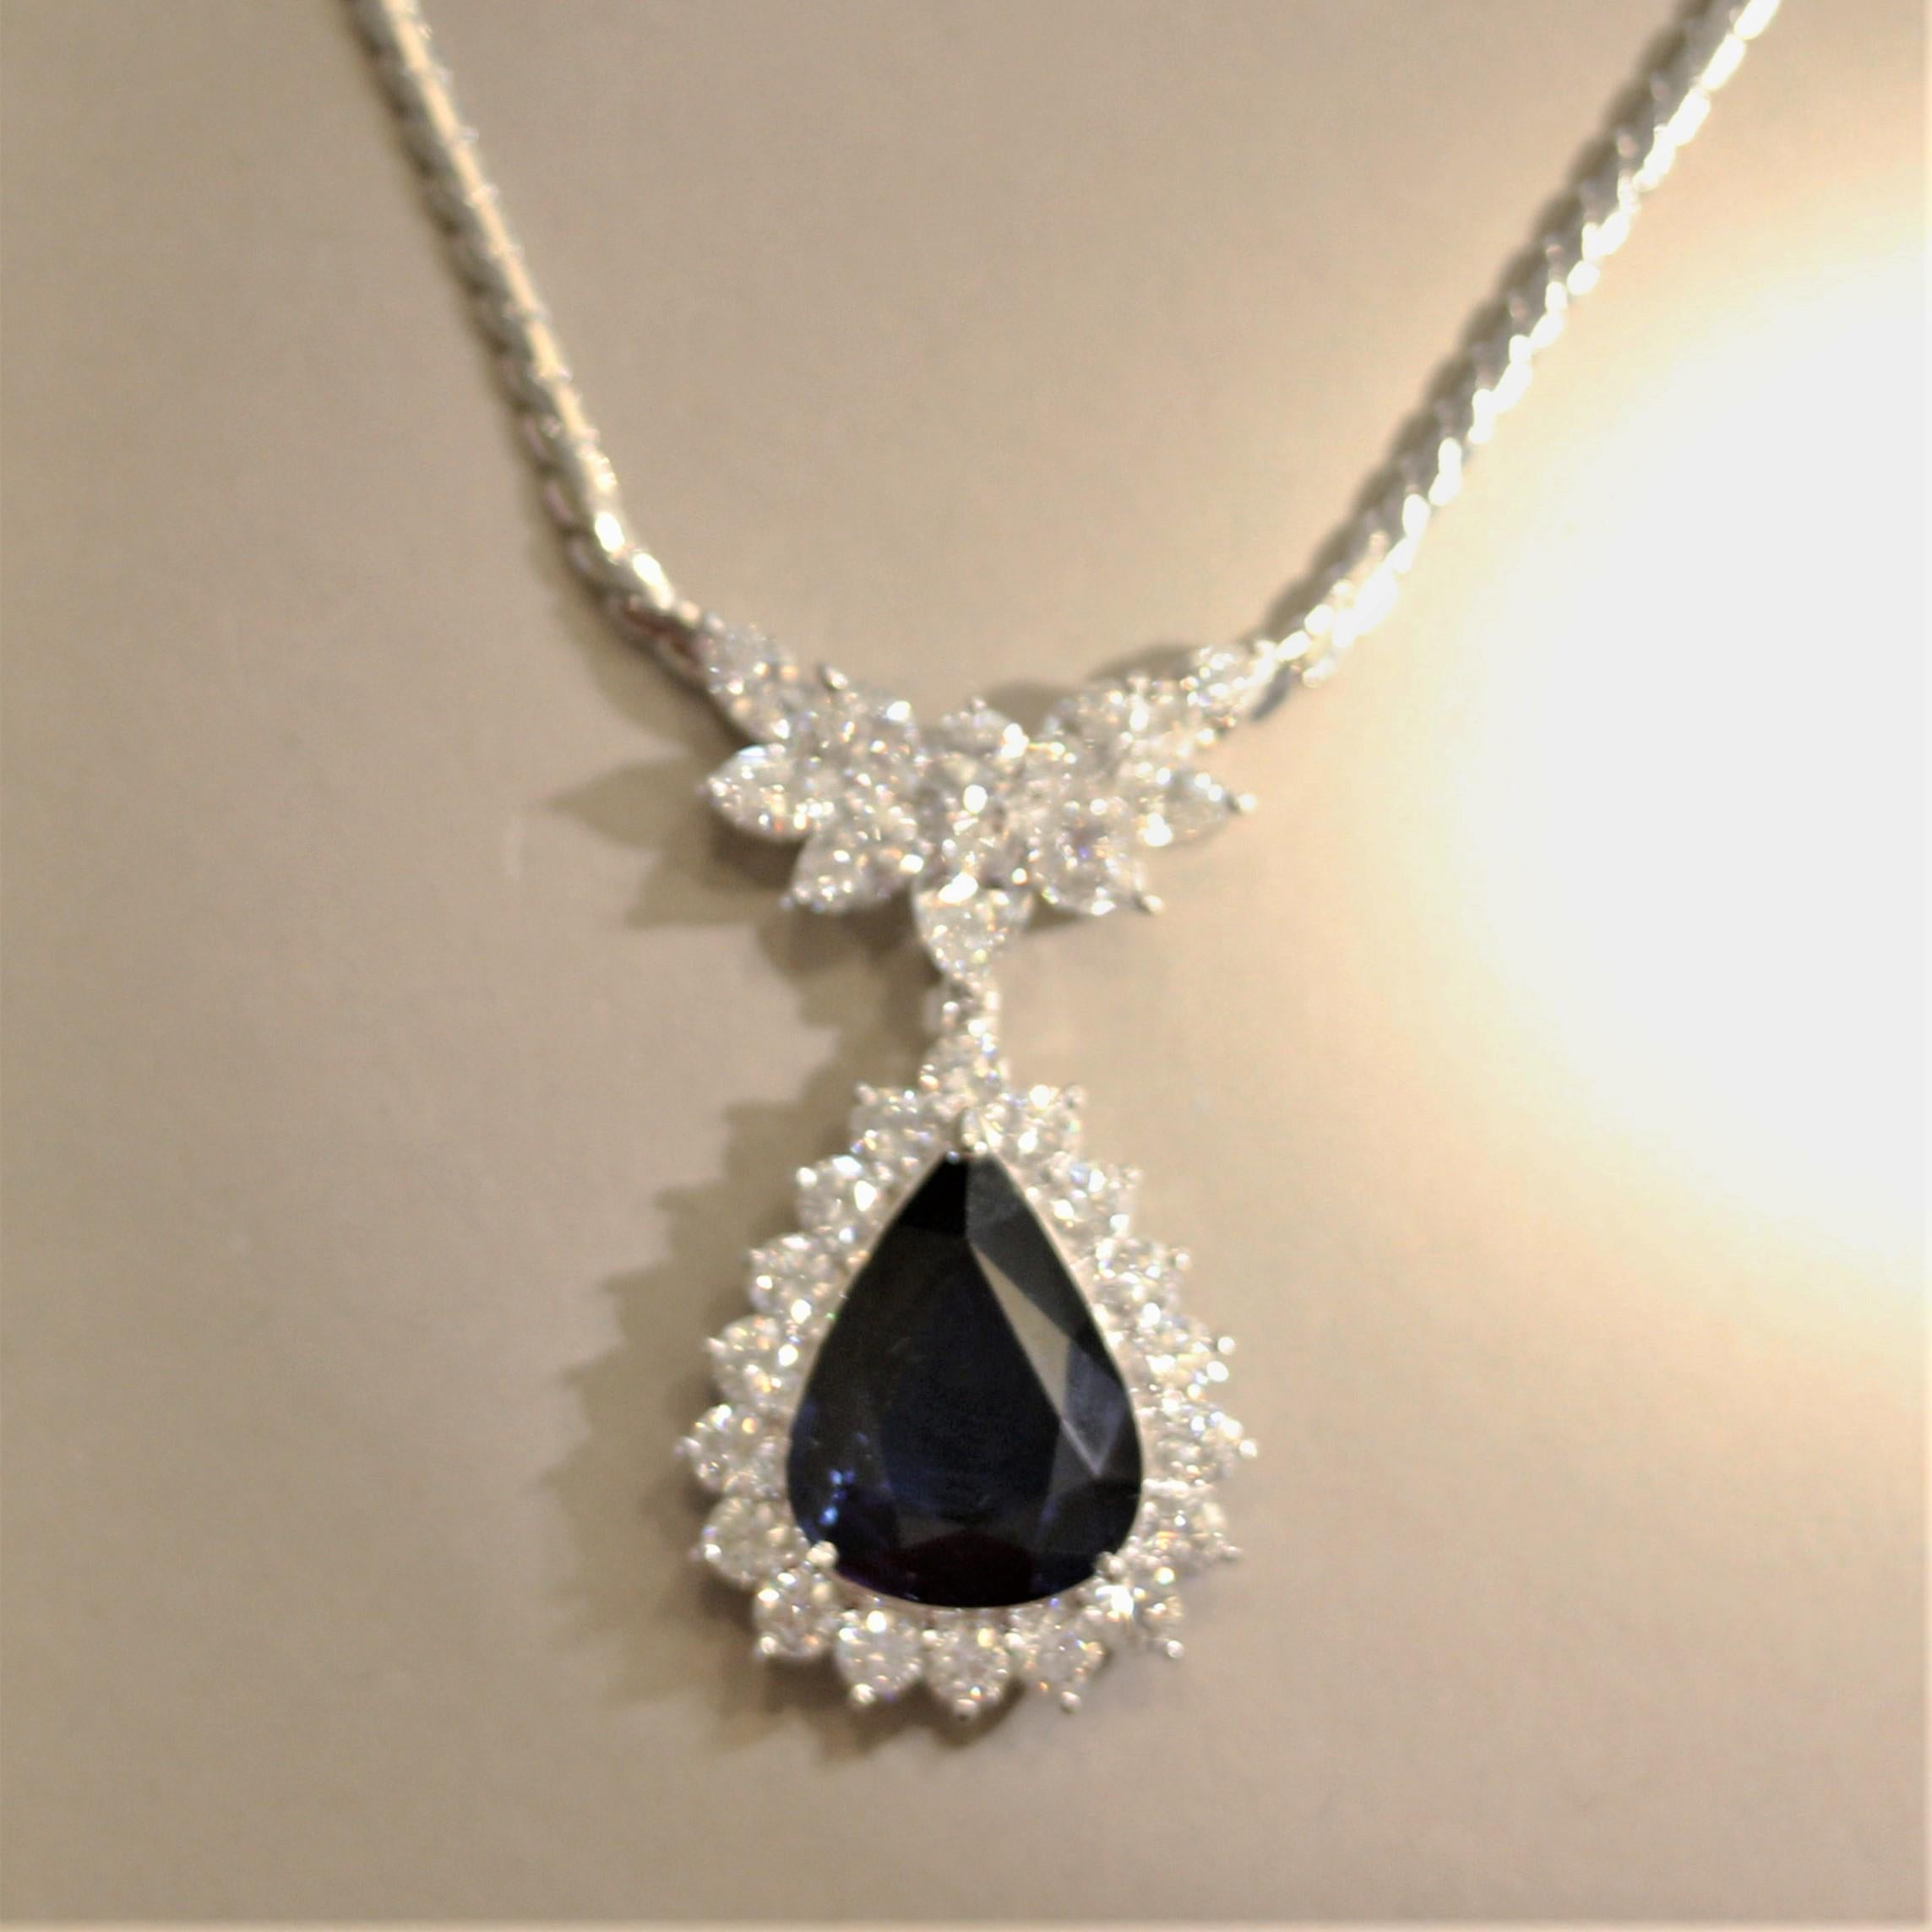 A large and impressive sapphire drop necklace! It features a 9.41 carat pear-shape sapphire with a rich even blue color. It is surrounded by large round brilliant-cut diamonds which weigh a total of 4.15 carats along with the diamond cluster above